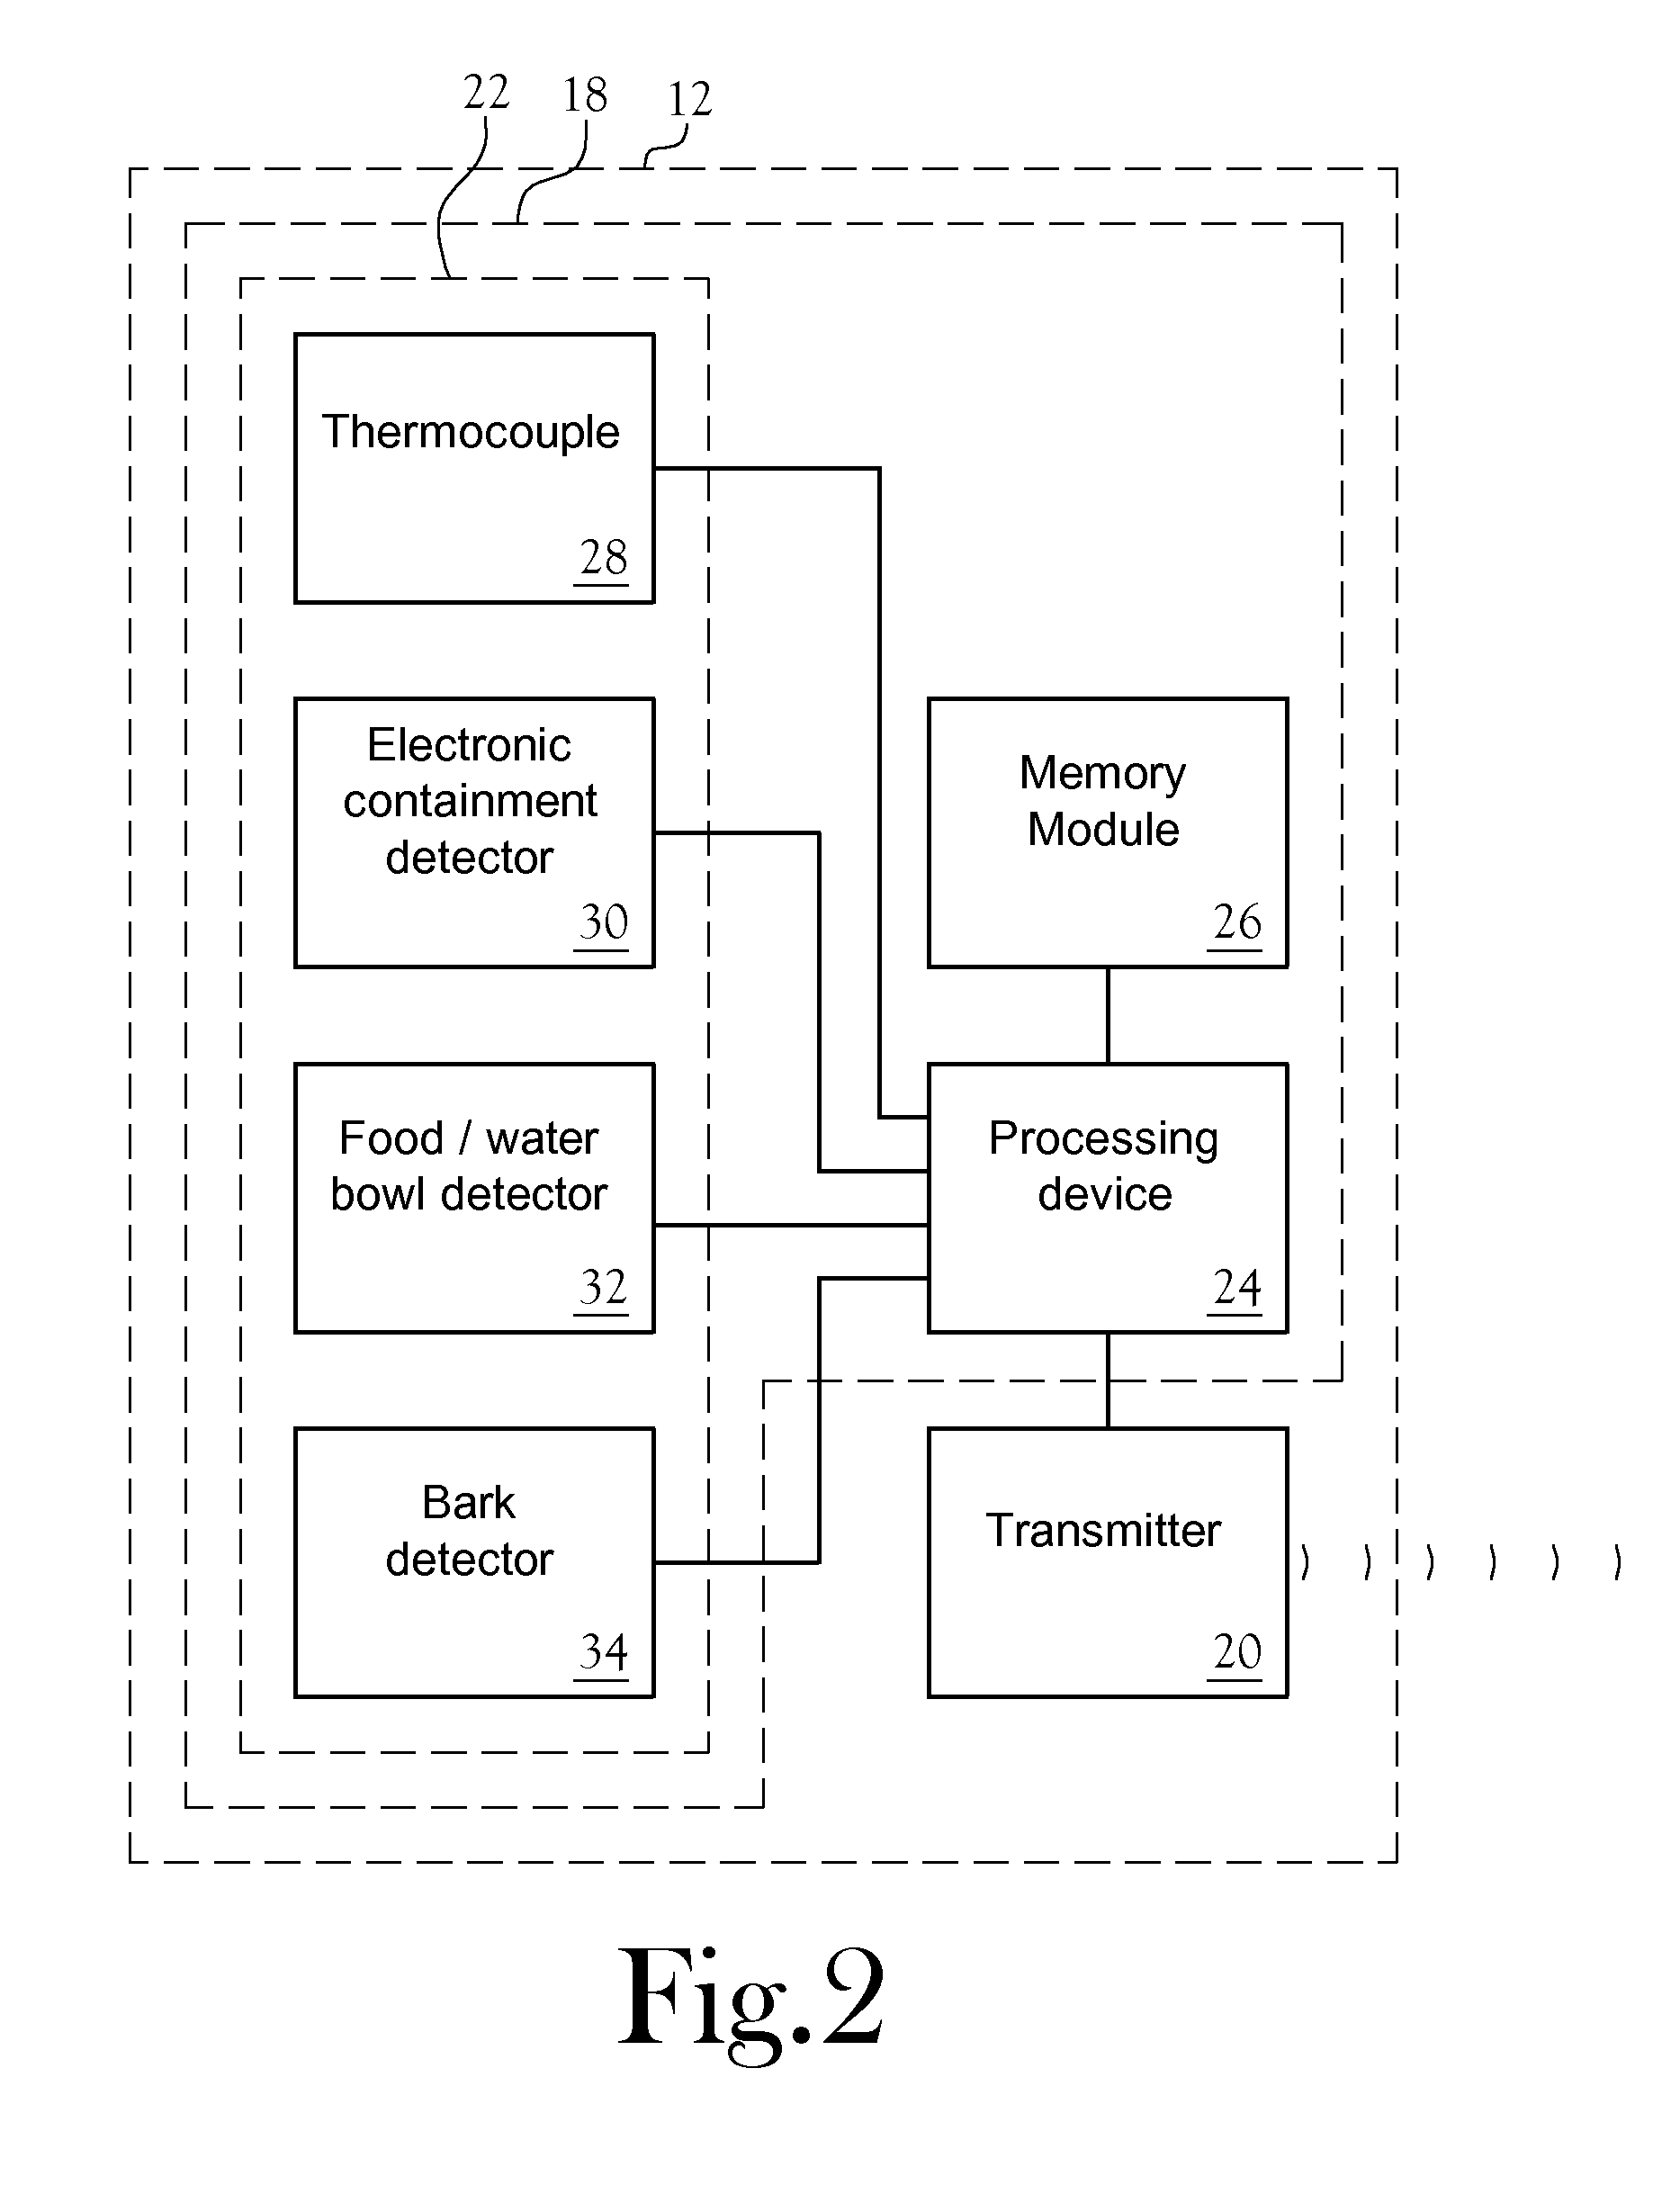 System for Detecting Information Regarding an Animal and Communicating the Information to a Remote Location